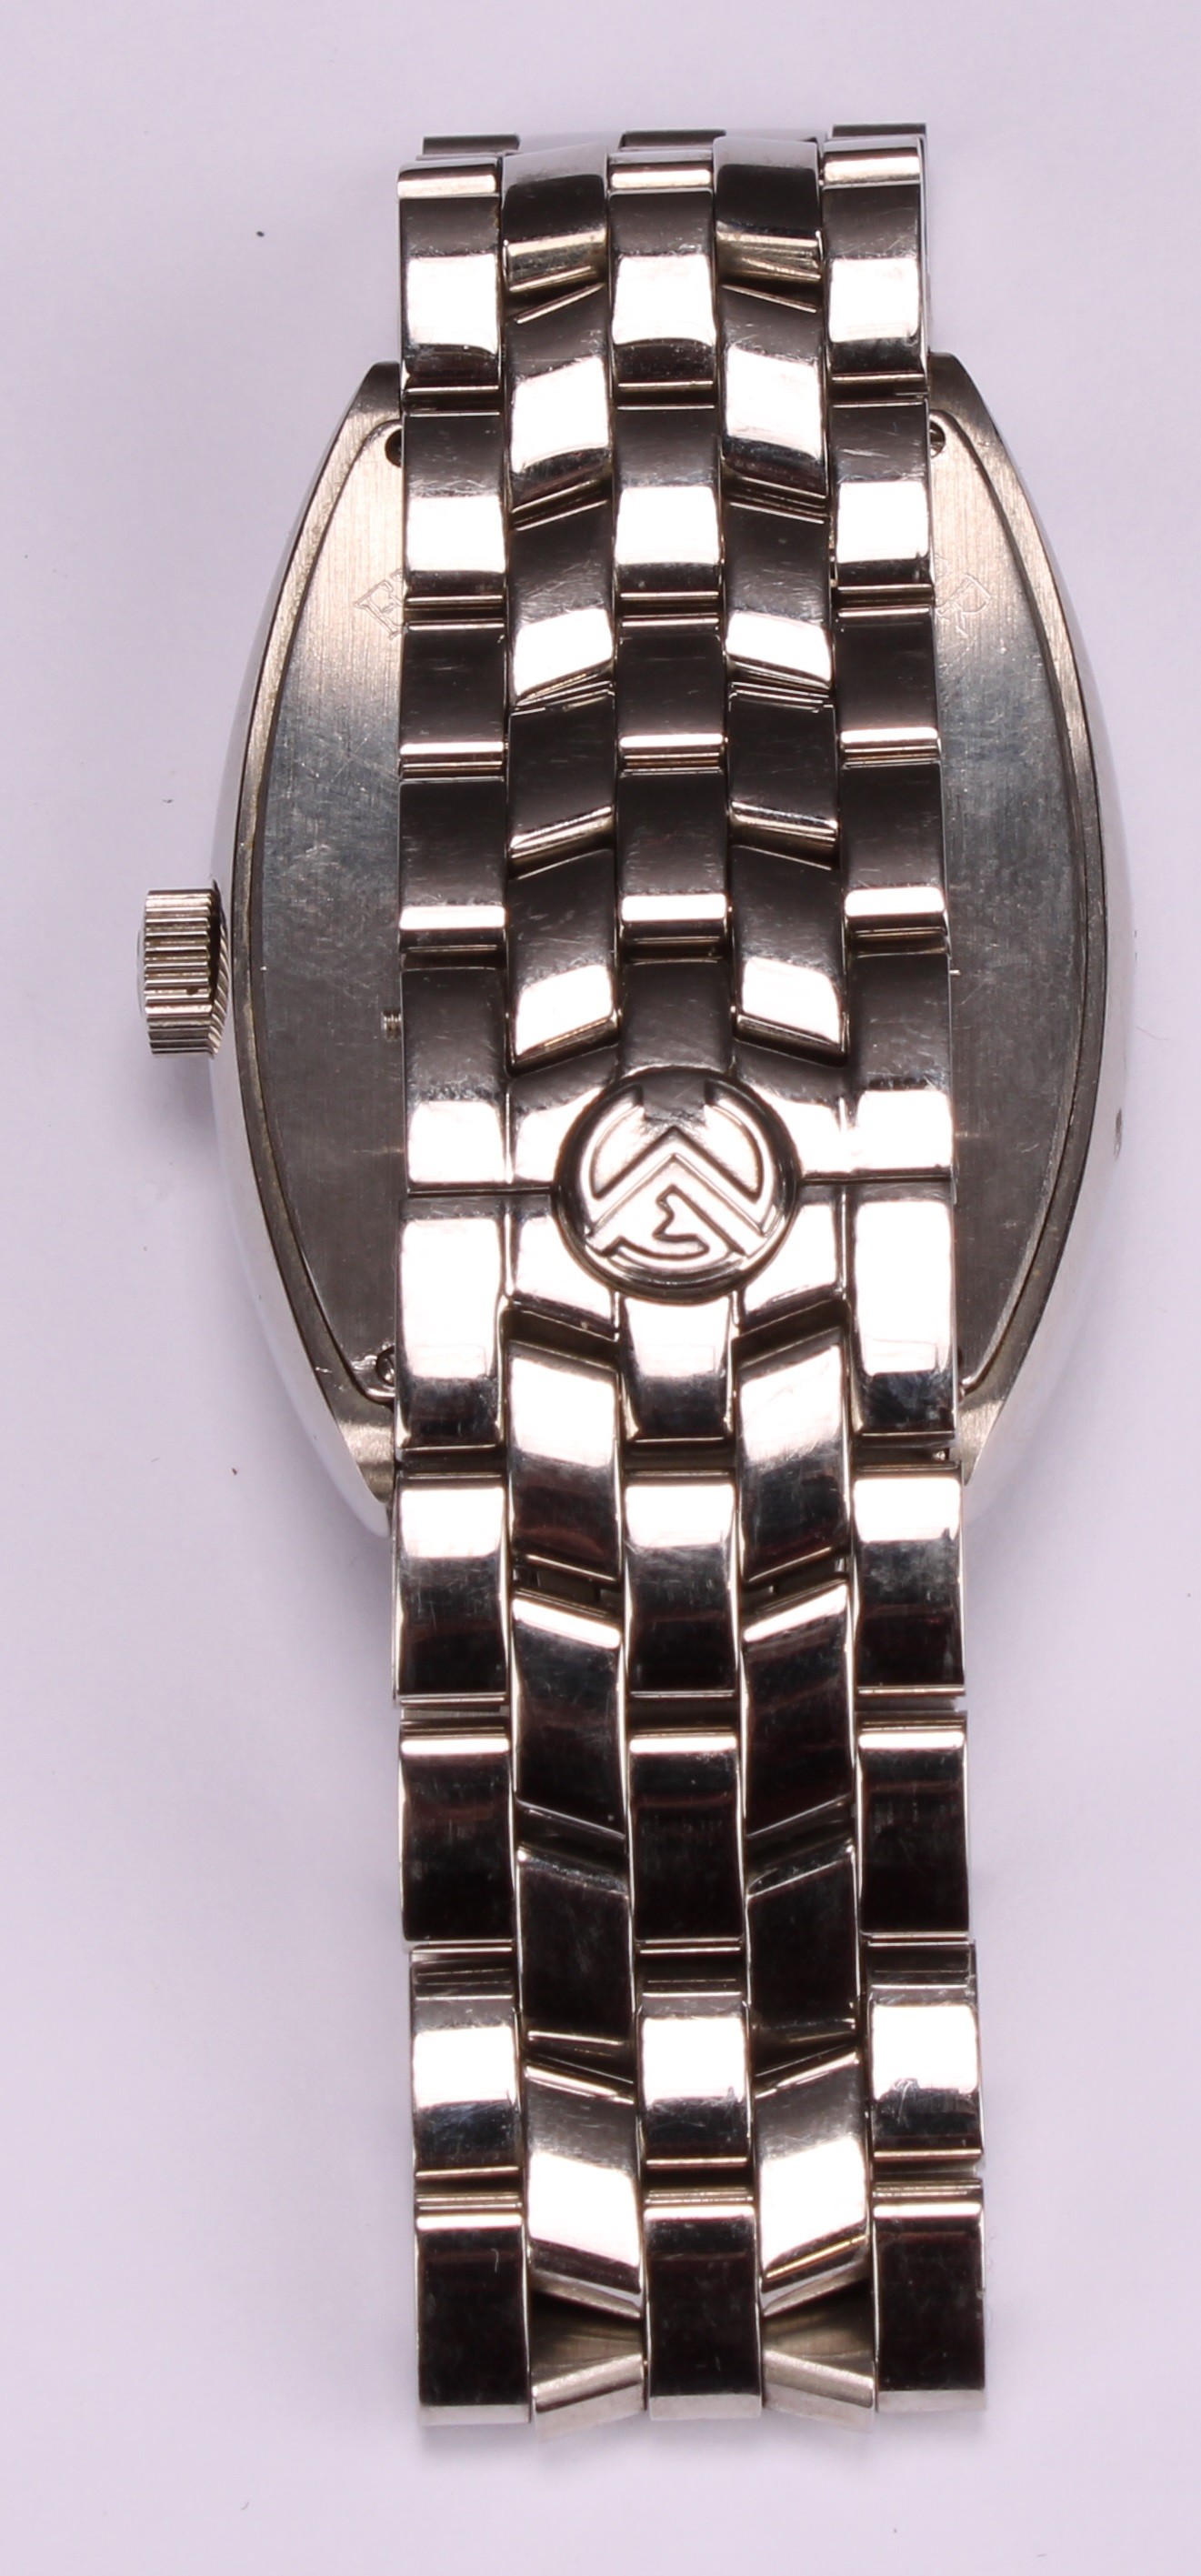 ***LOT WITHDRAWN ***A Franck Muller of Geneve stainless steel watch, Crazy Color Dreams (sic.), - Image 5 of 6